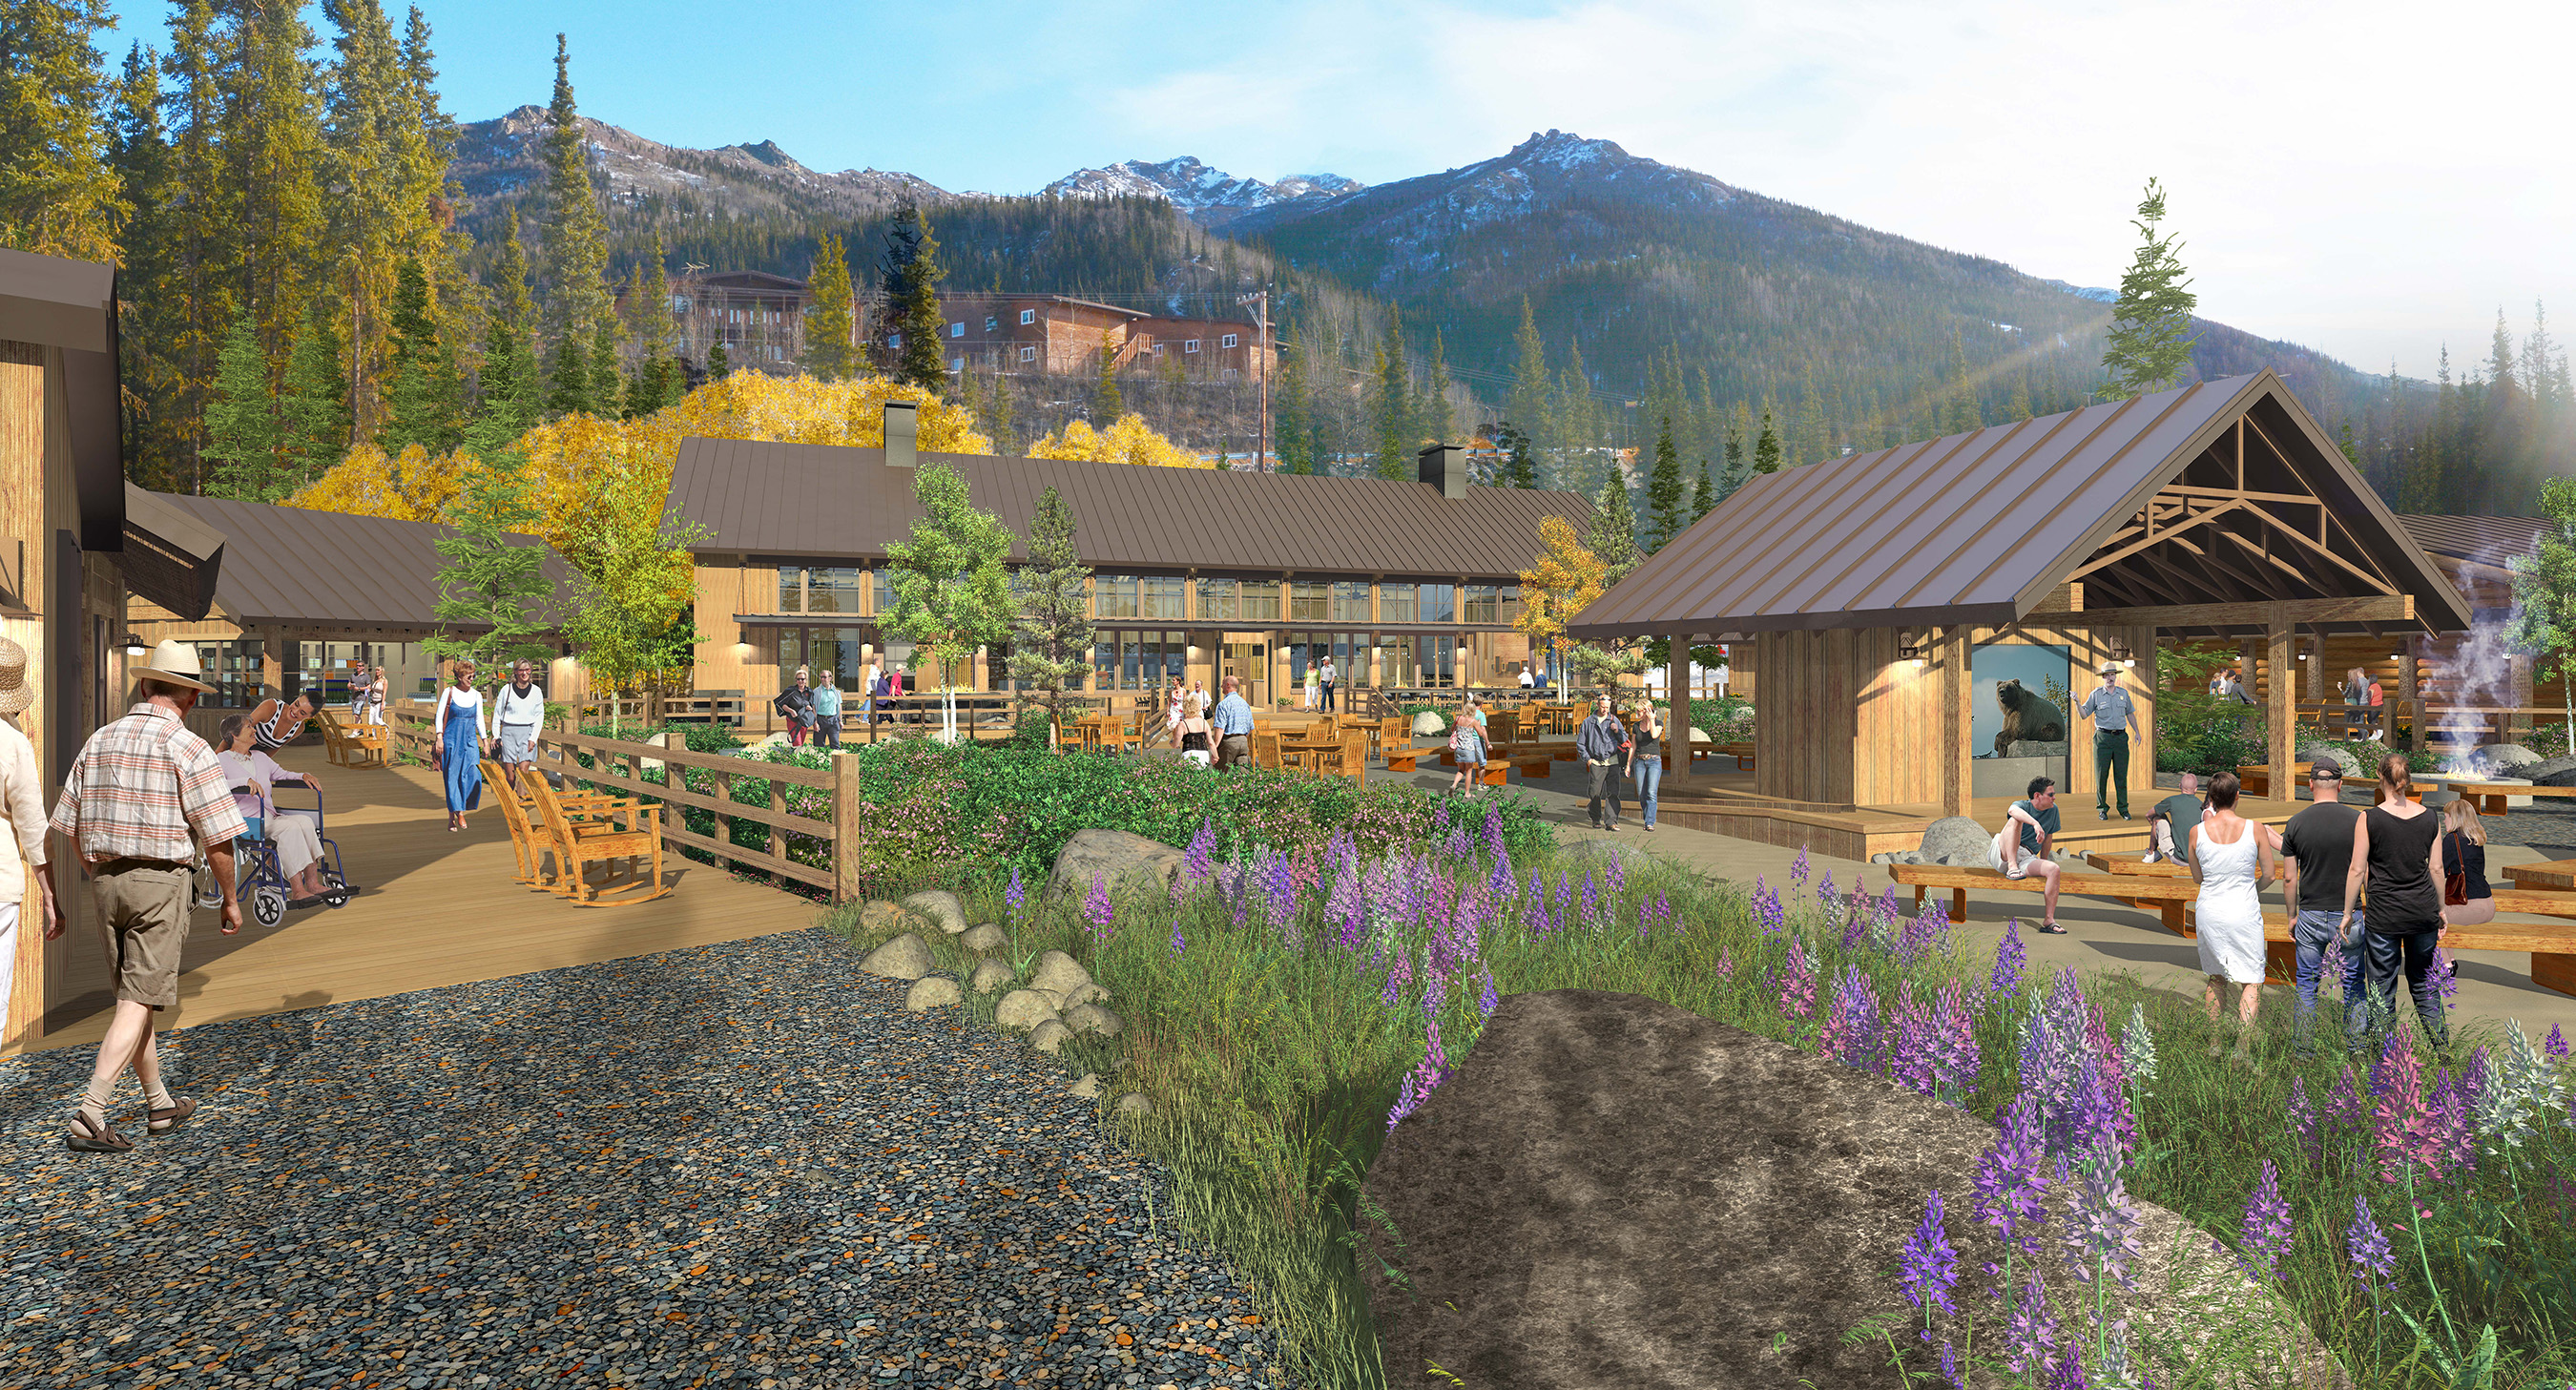 Holland America Line has broken ground on a new “Base Camp” complex at the company’s McKinley Chalet Resort near the entrance to Alaska's Denali National Park.